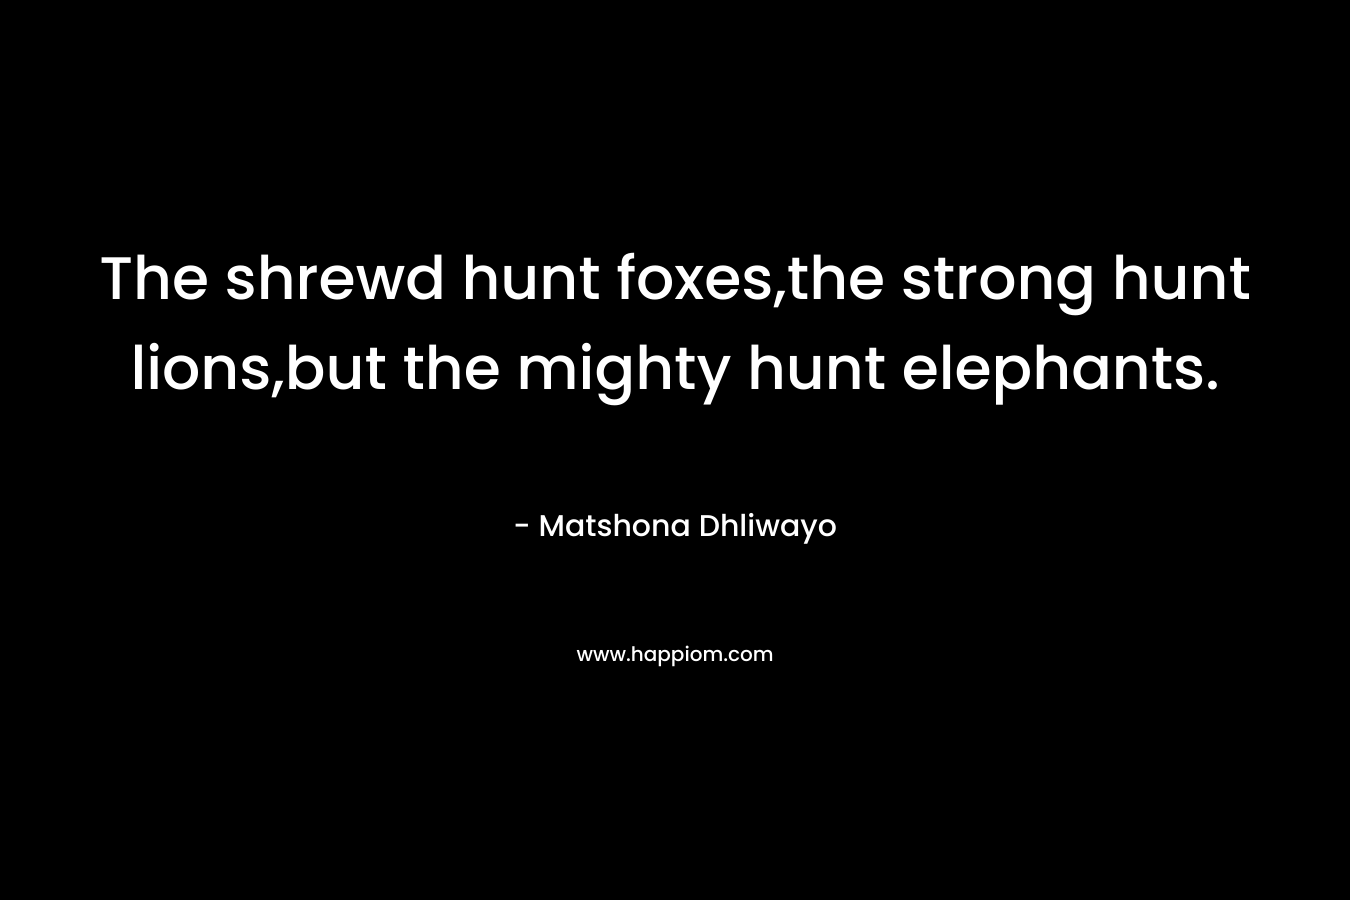 The shrewd hunt foxes,the strong hunt lions,but the mighty hunt elephants. – Matshona Dhliwayo